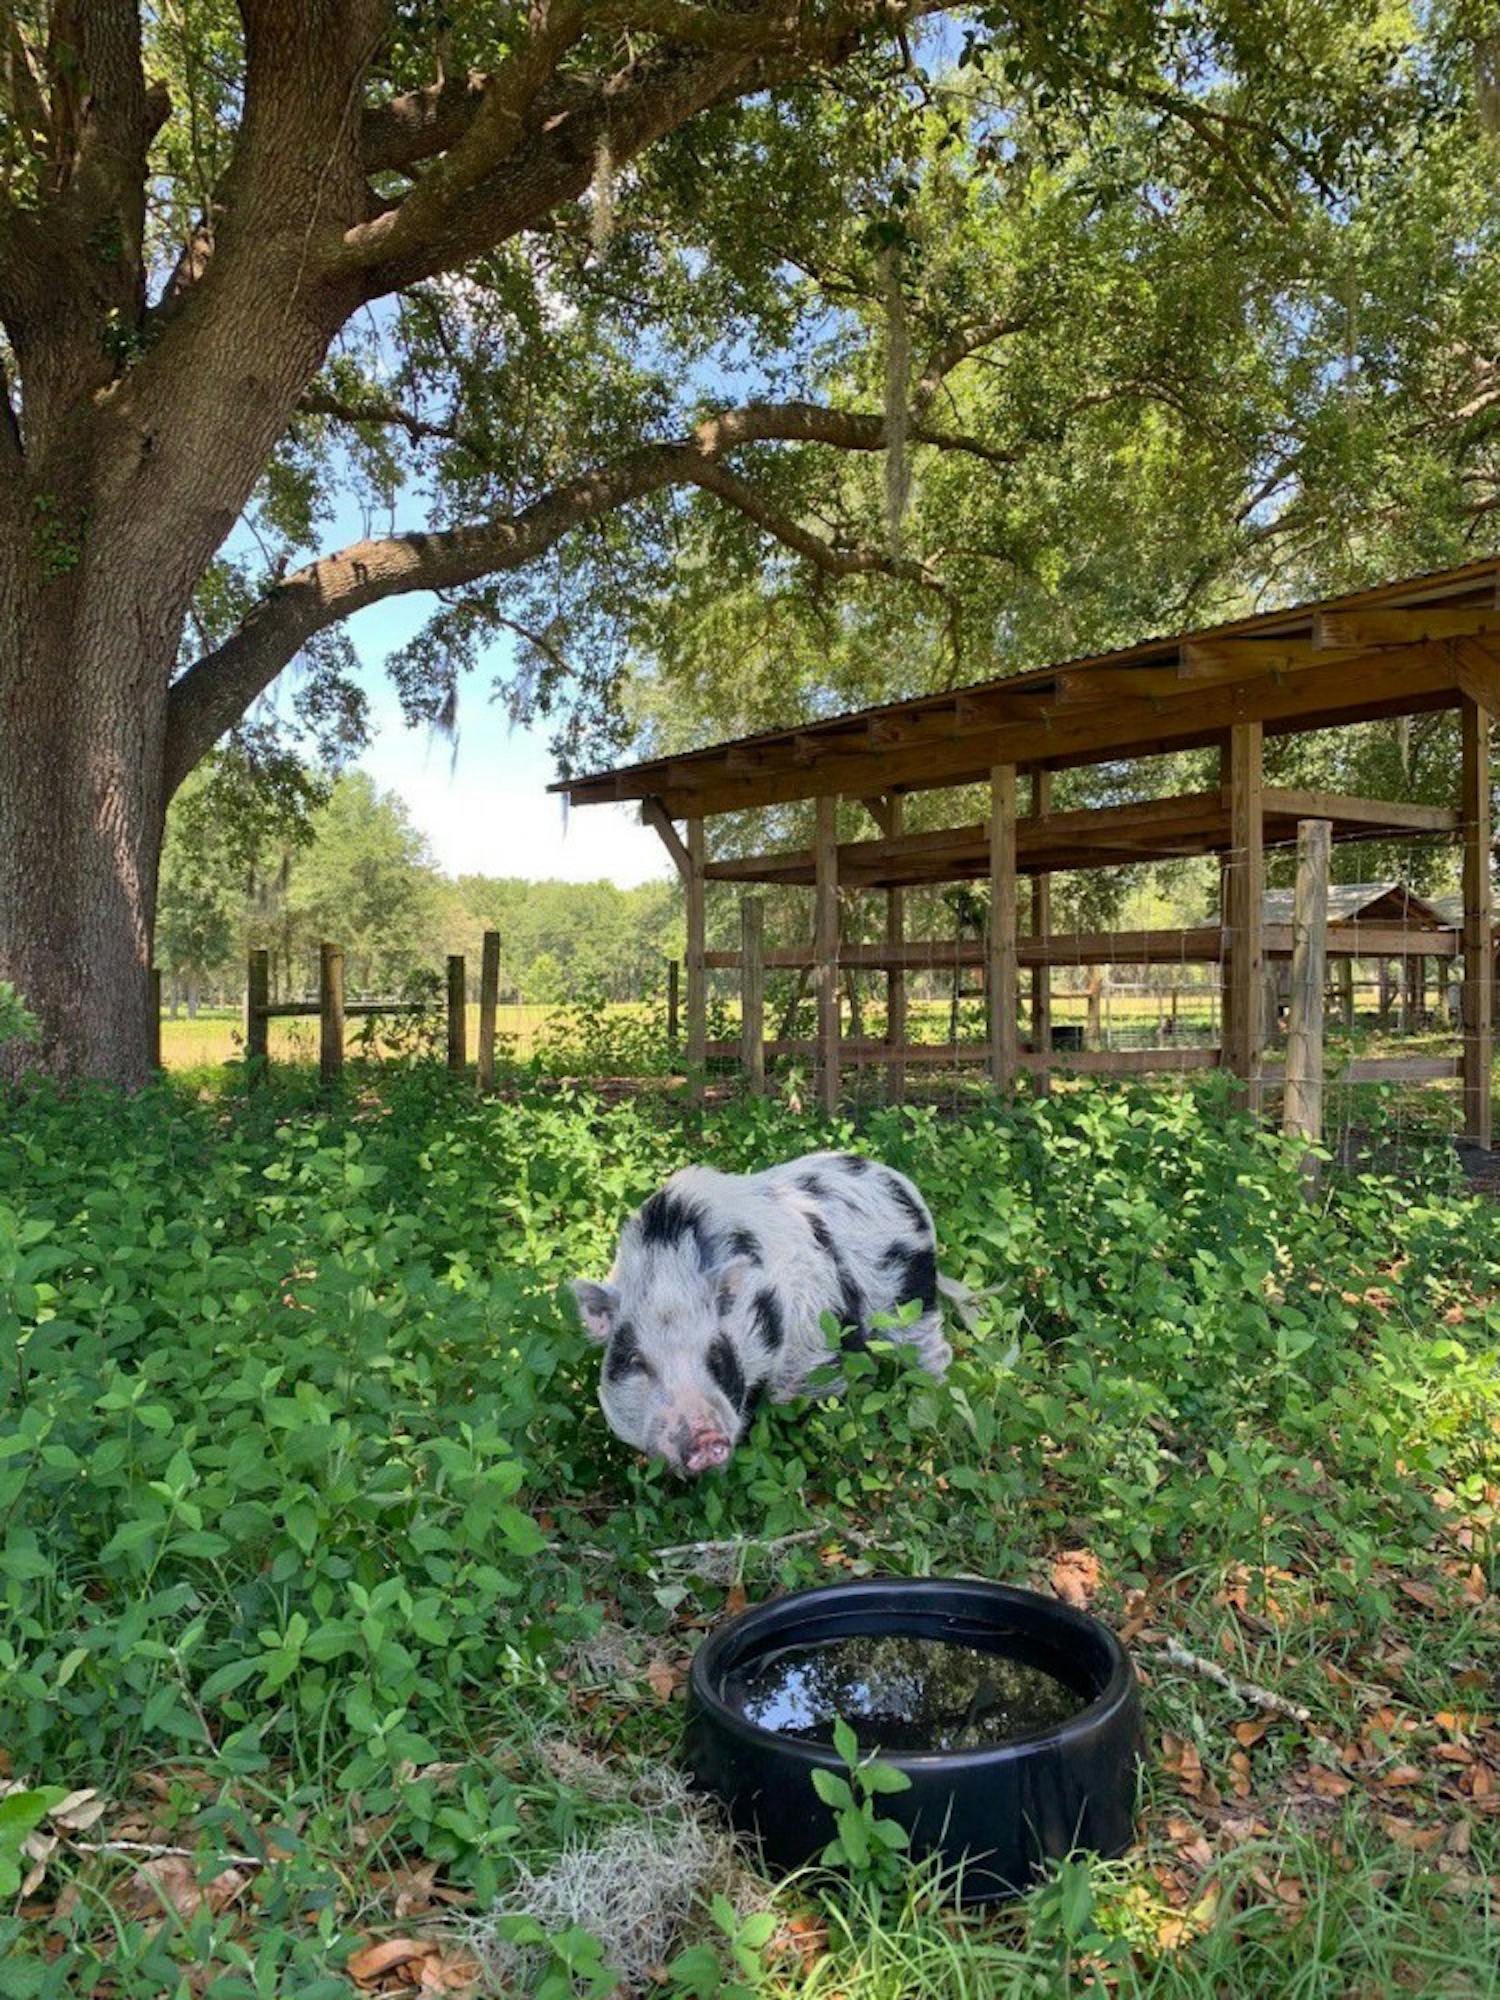 Toby, 2-year-old Potbelly pig, often referred to as a “mini pig” enjoying the afternoon at his new home in Peacefield. Toby was neglected in a confined space before a local animal rights activist brought him to Peacefield where he has acres to explore, friends to keep him company and lots of love.